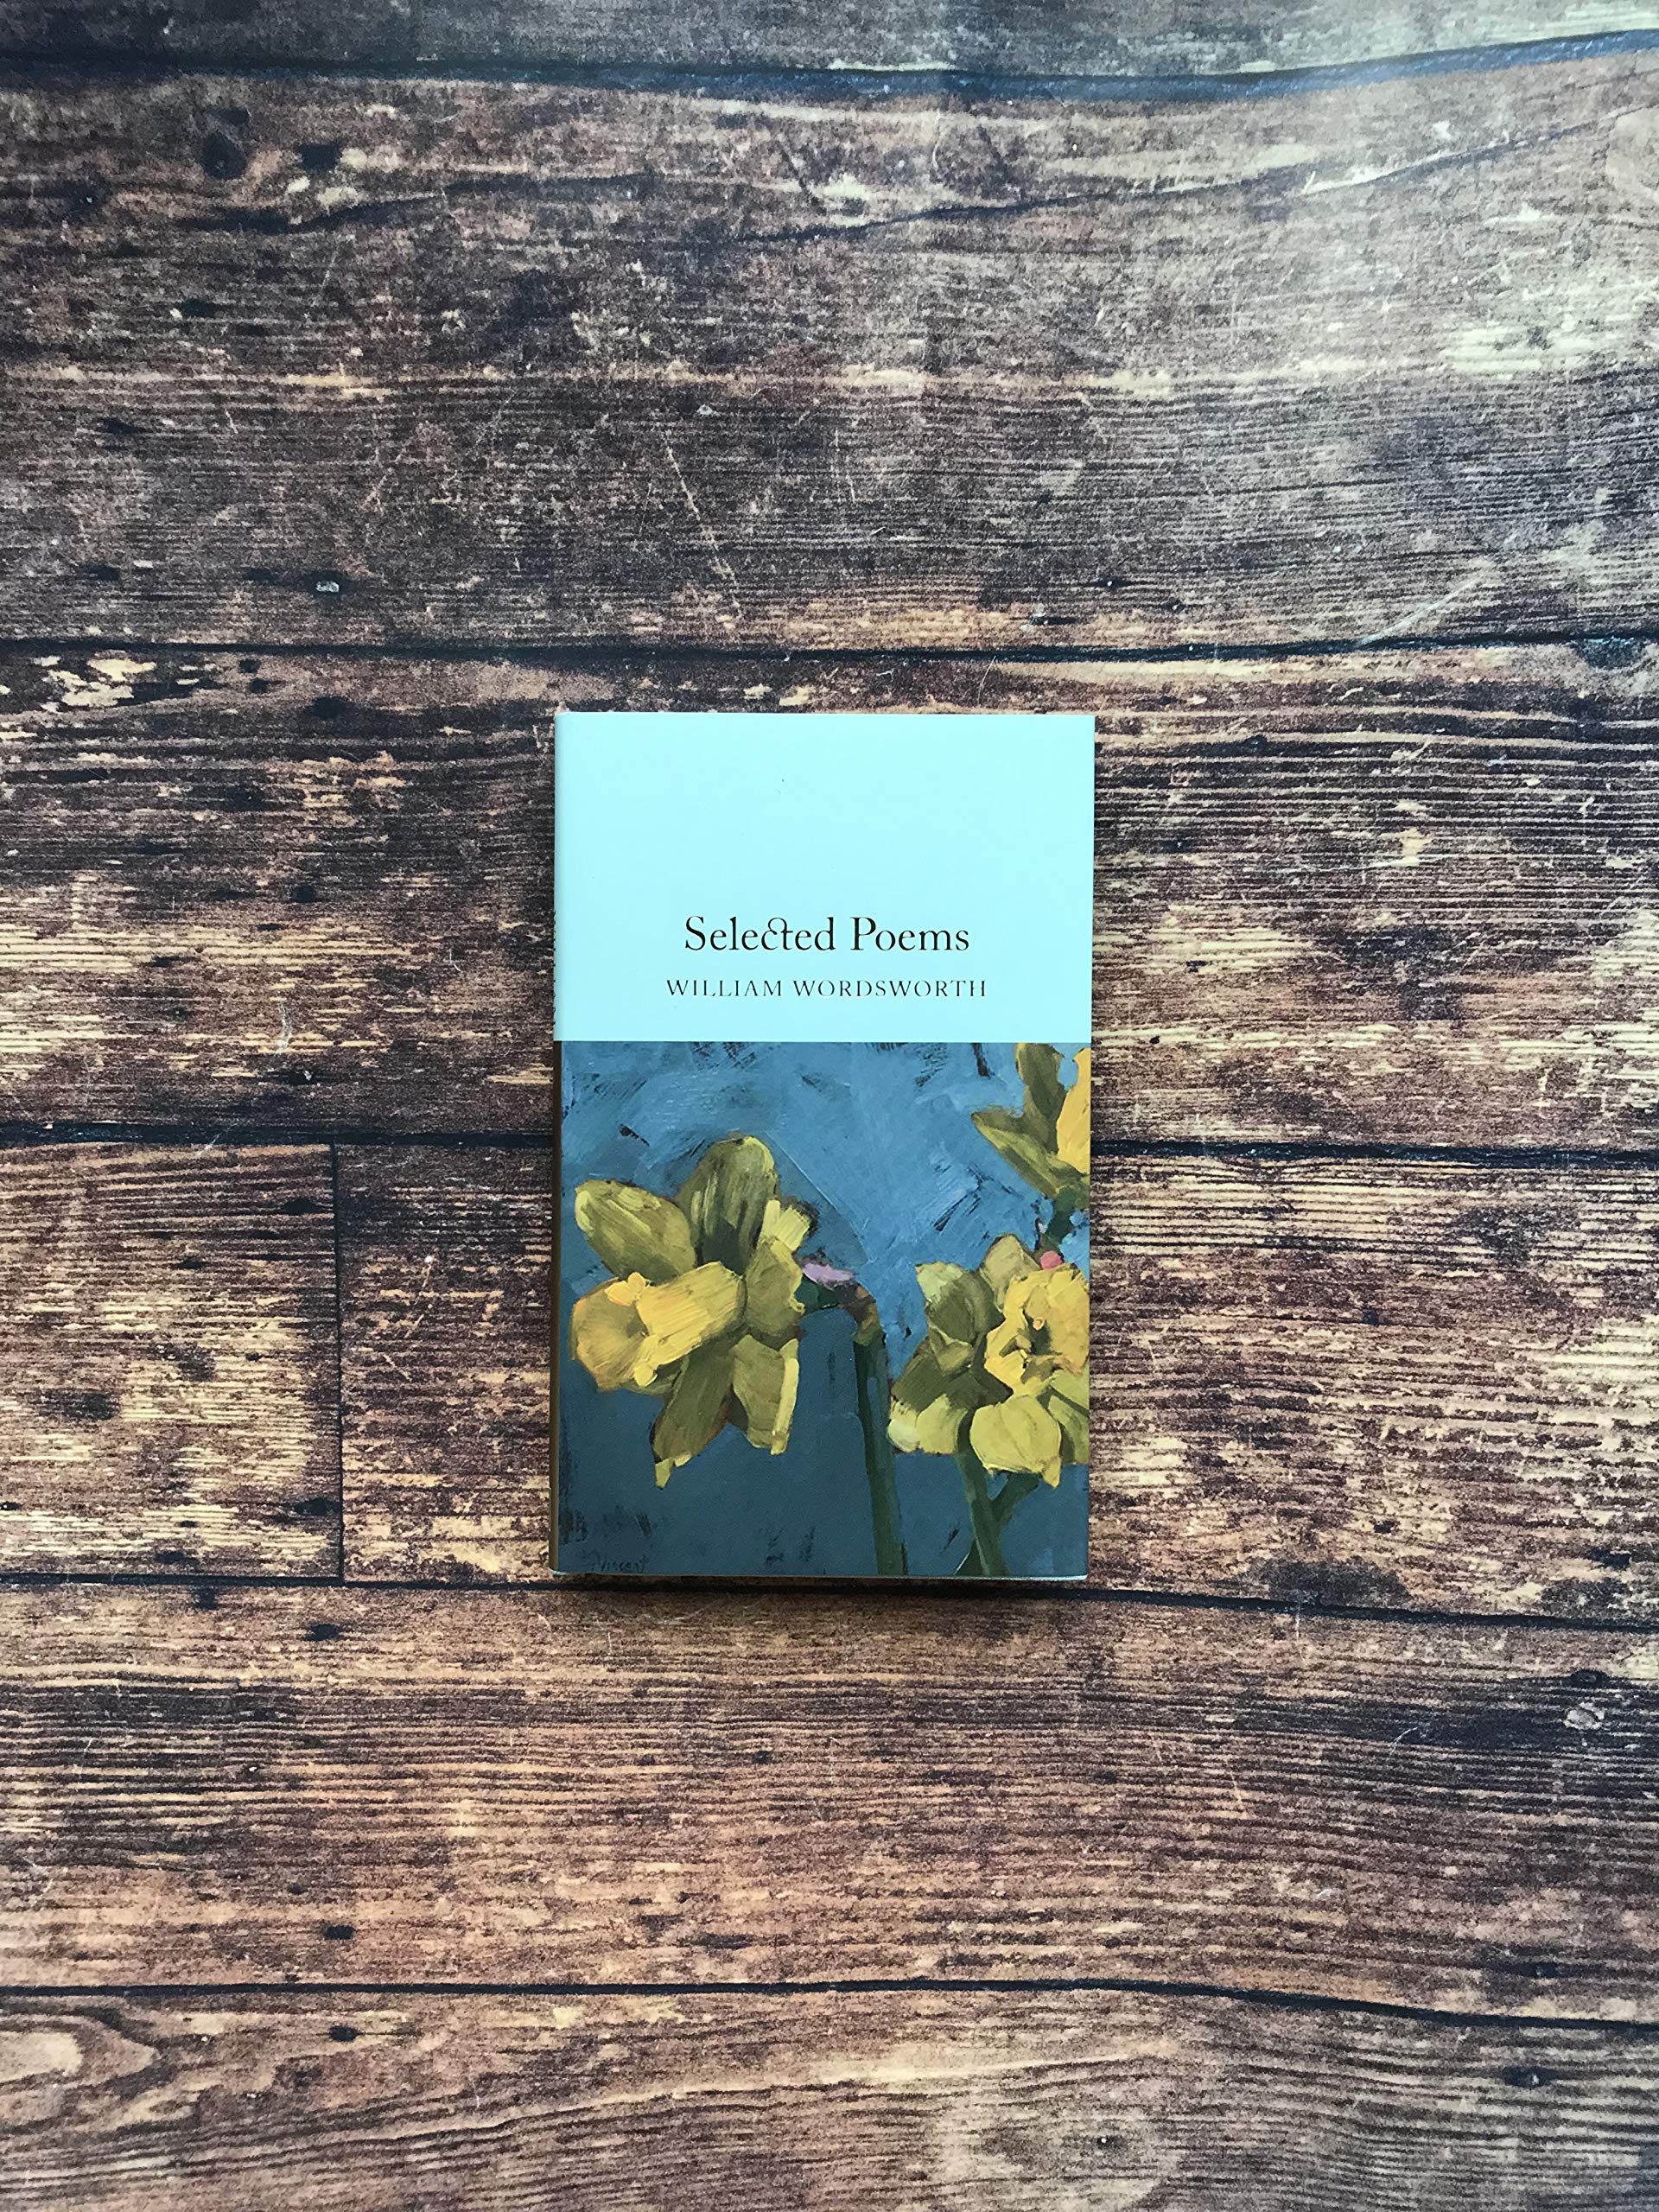 Selected Poems | William Wordsworth